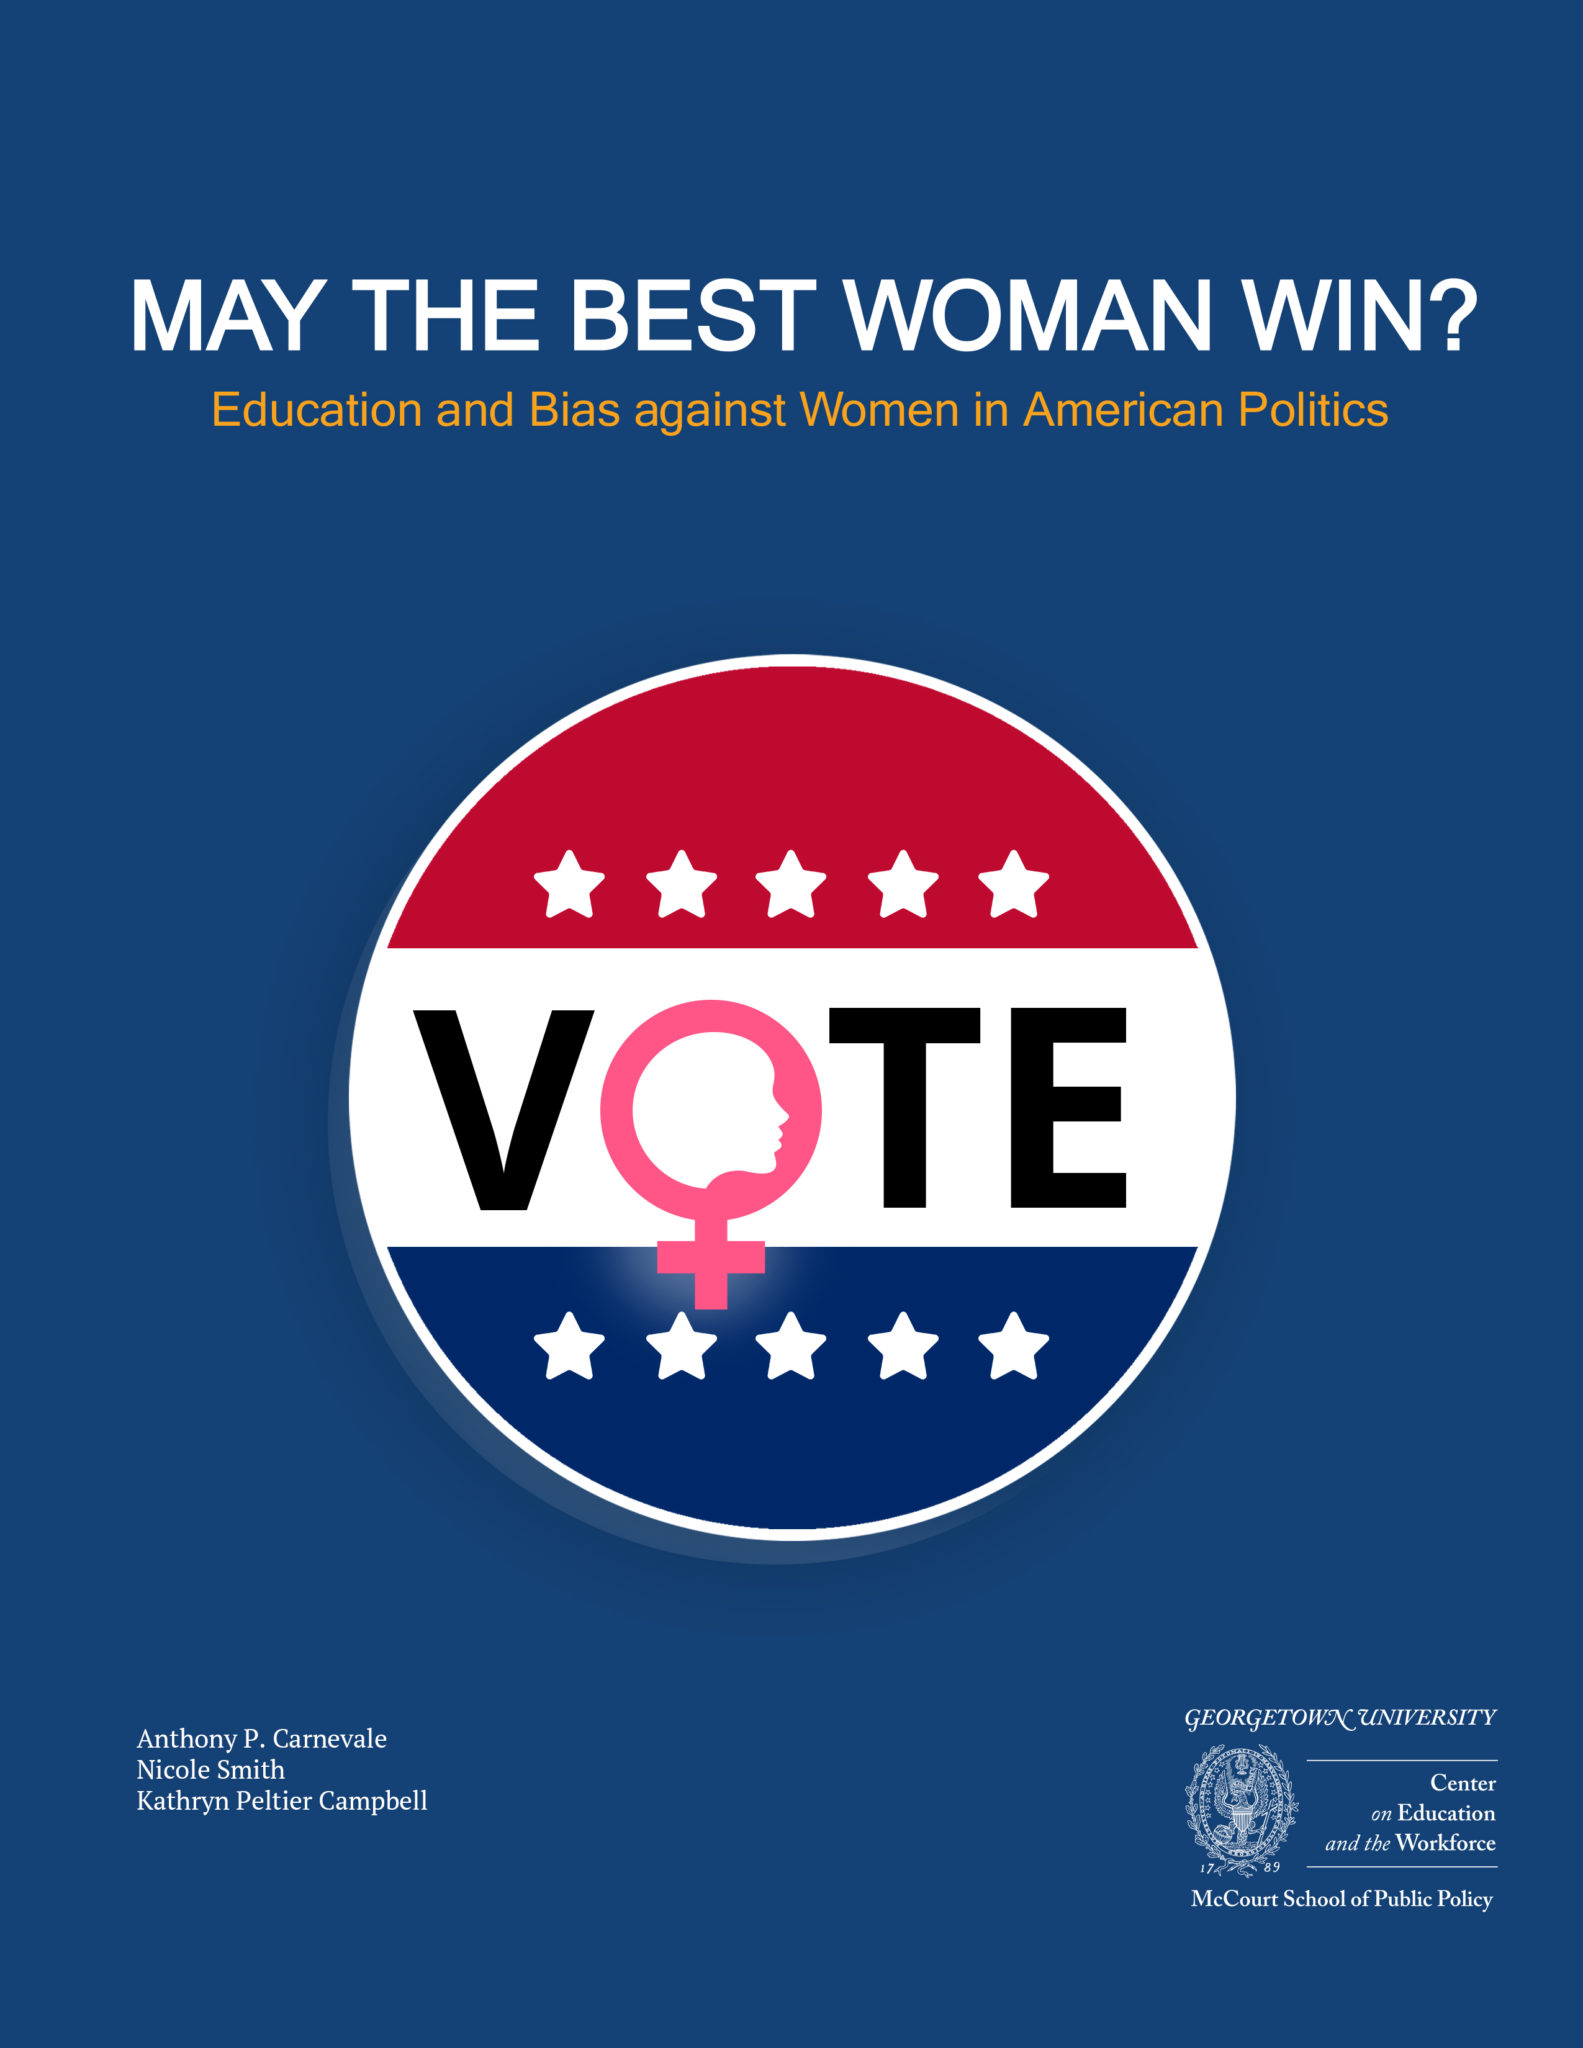 May the best woman win?